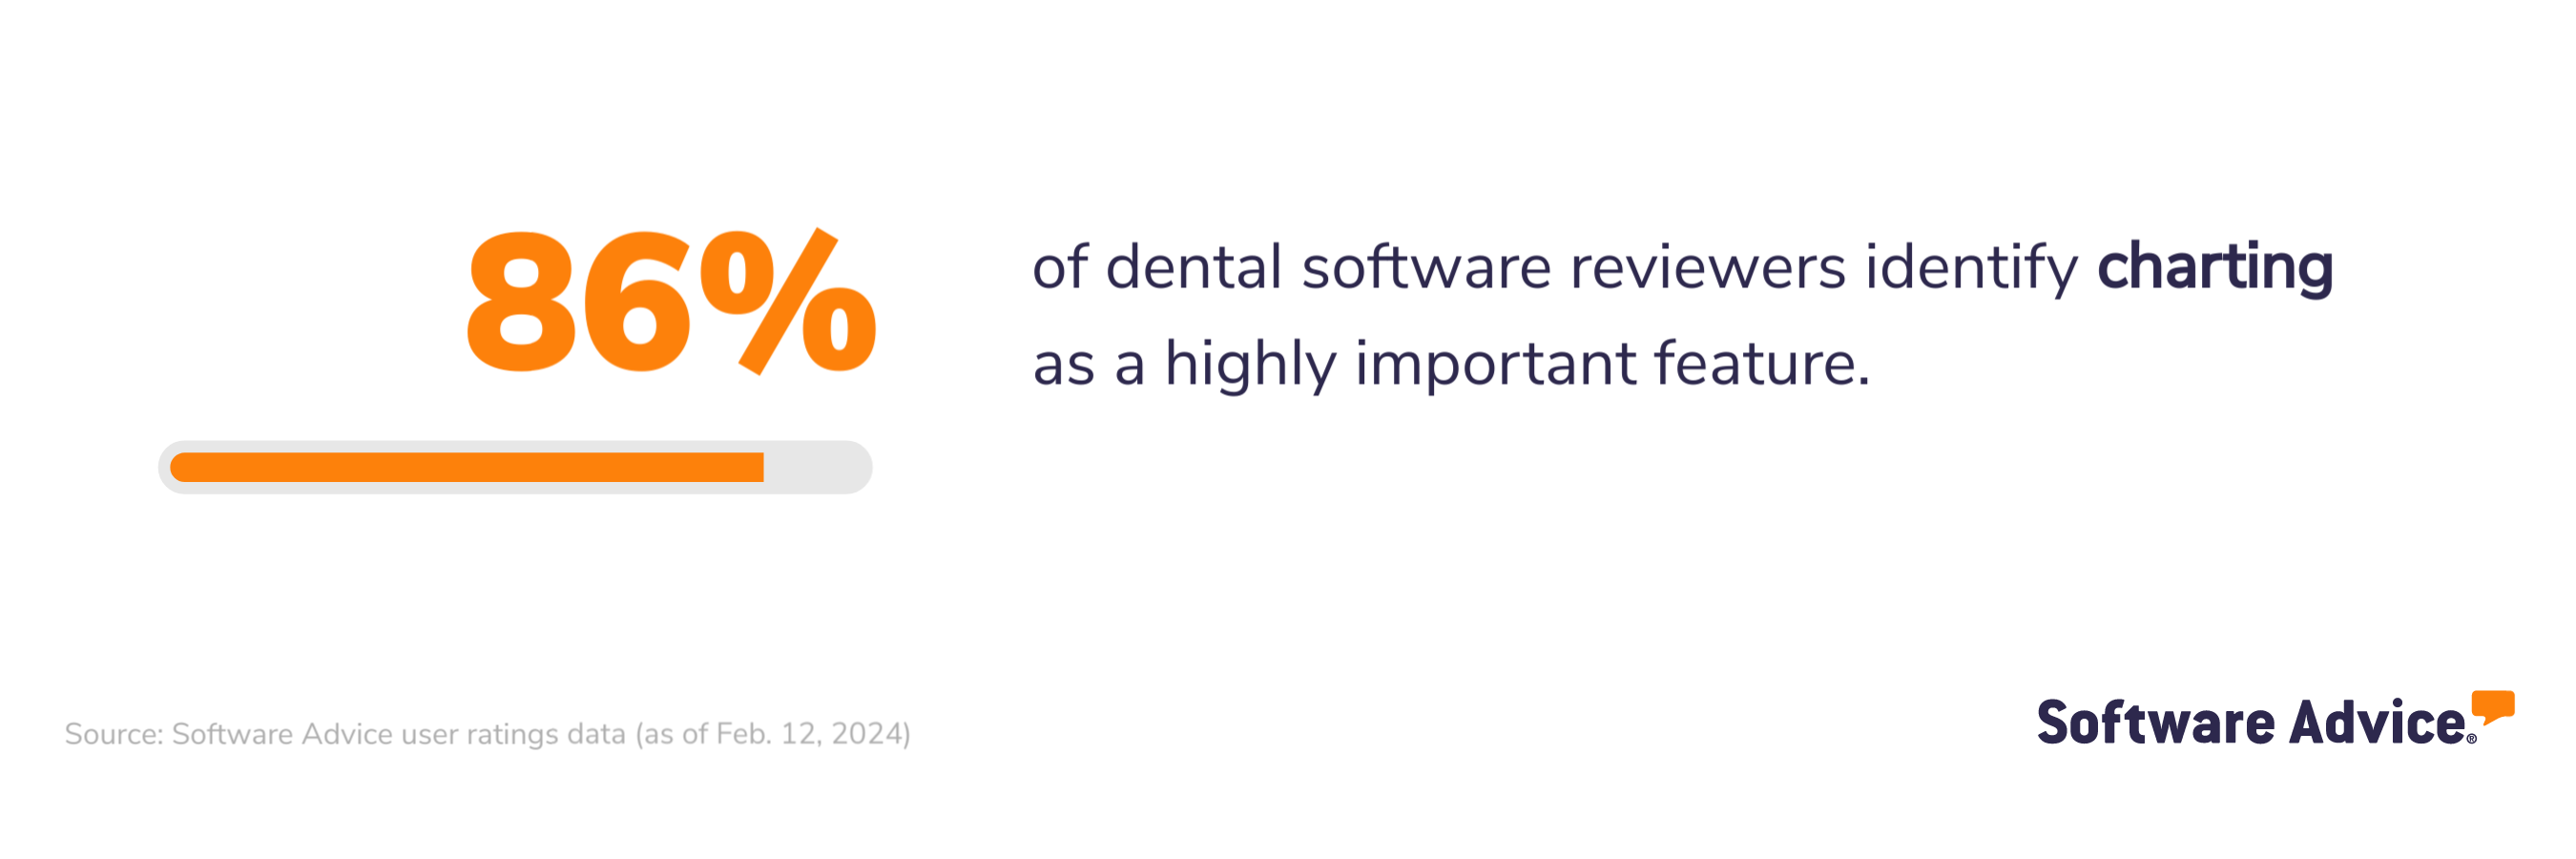 86% of dental software reviewers identify charting as a highly important feature